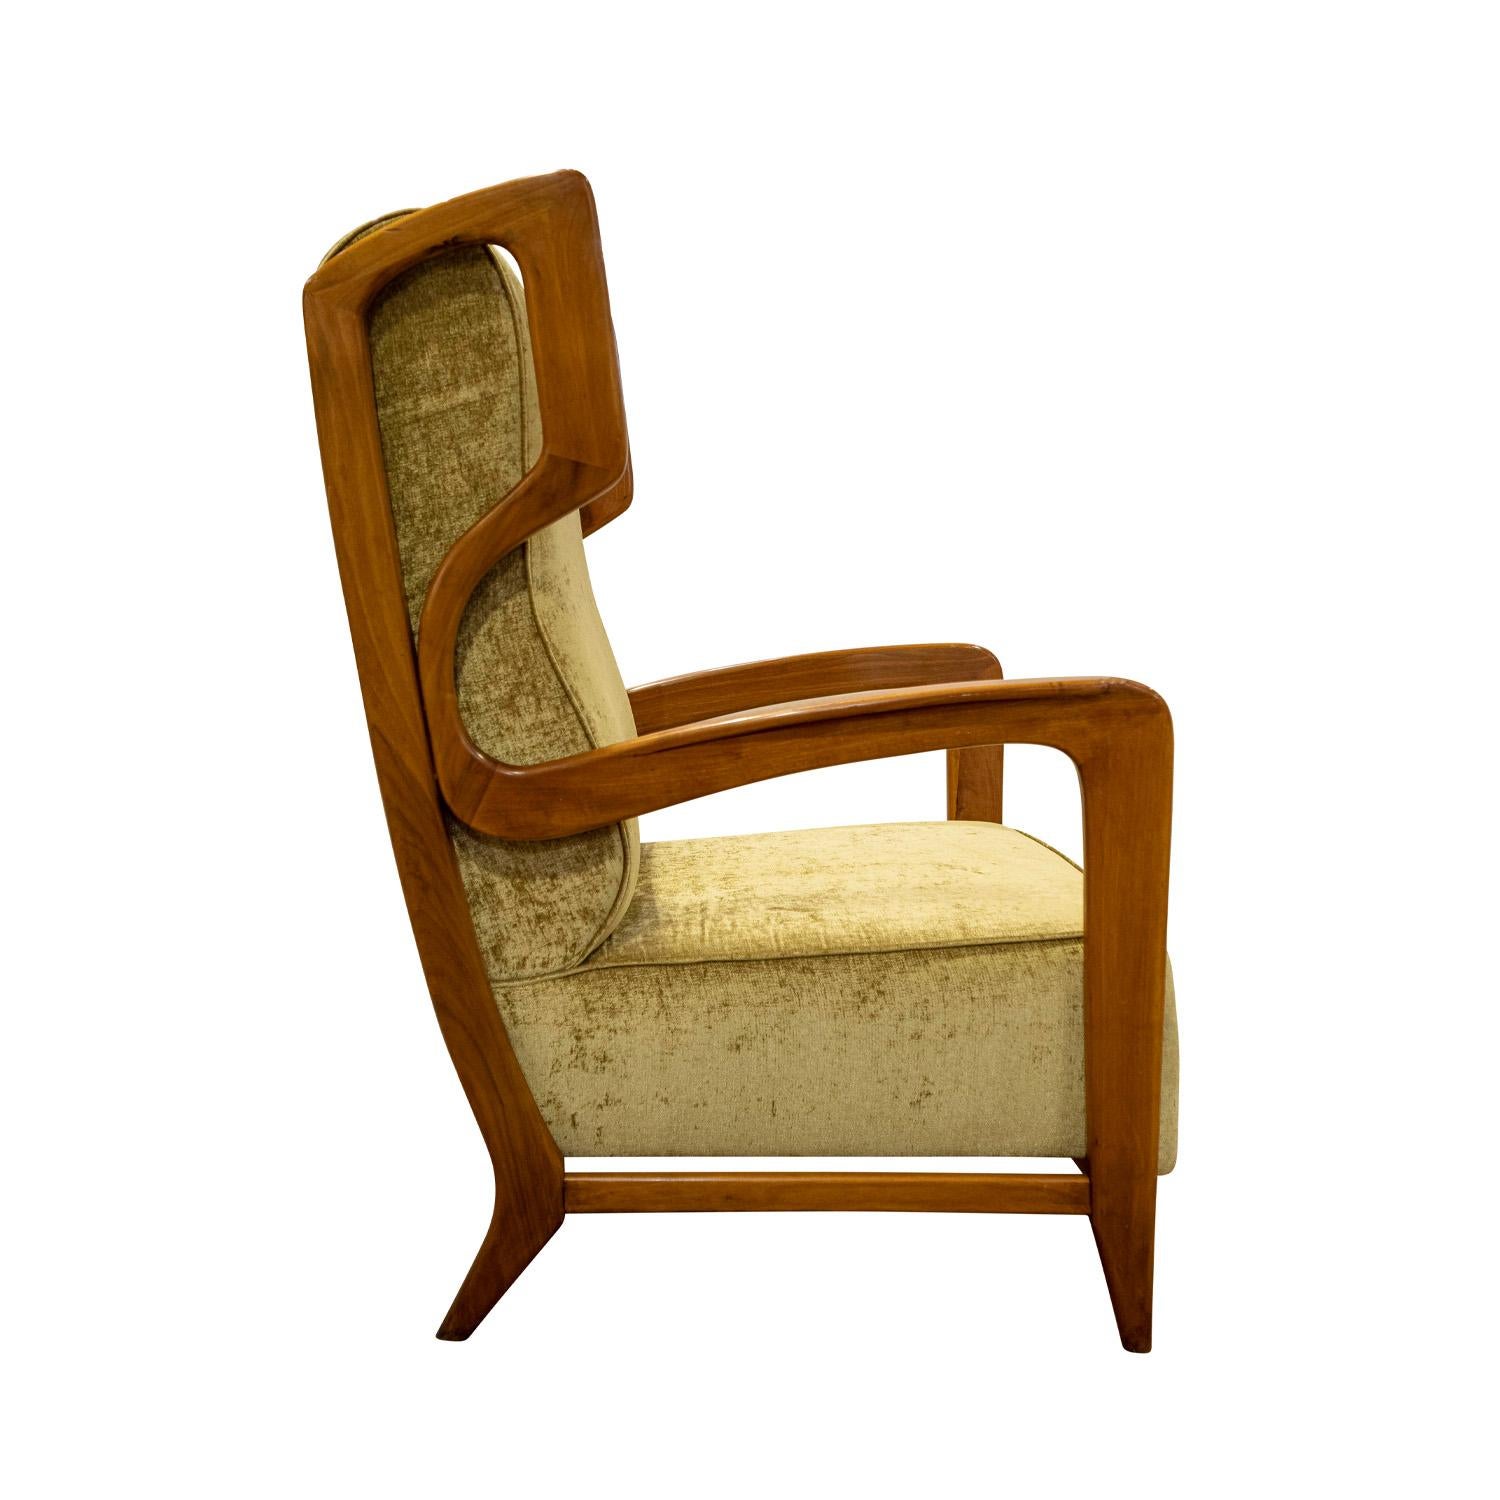 Hand-Crafted Gio Ponti Rare Pair of Lounge Chairs 1940s 'COA from Ponti Archive'